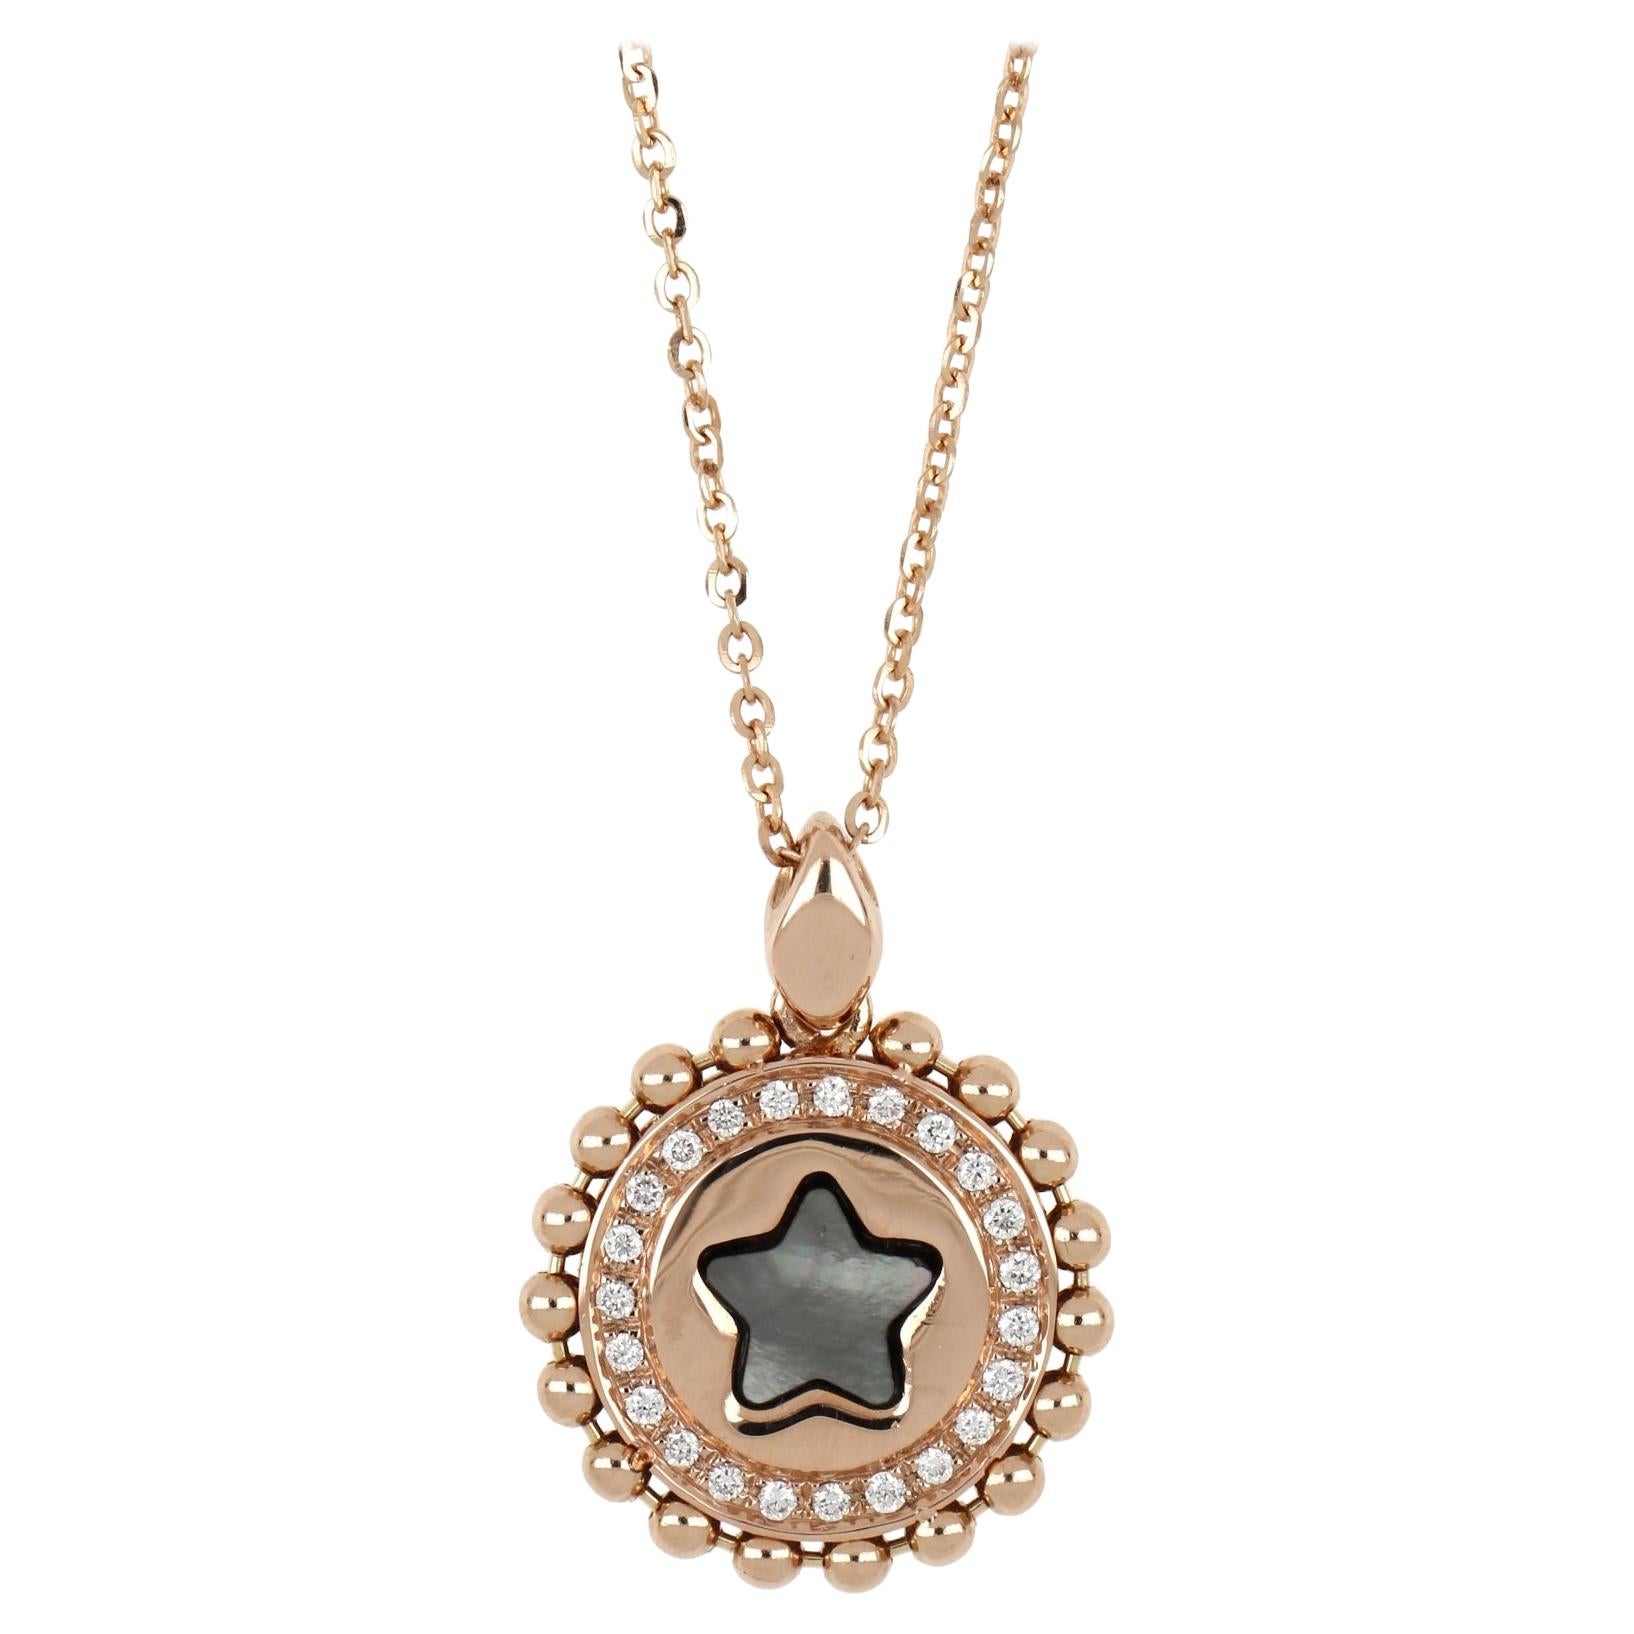 18kt Rose Gold Reverse Necklace "Star" with Diamonds and Mother of Pearl